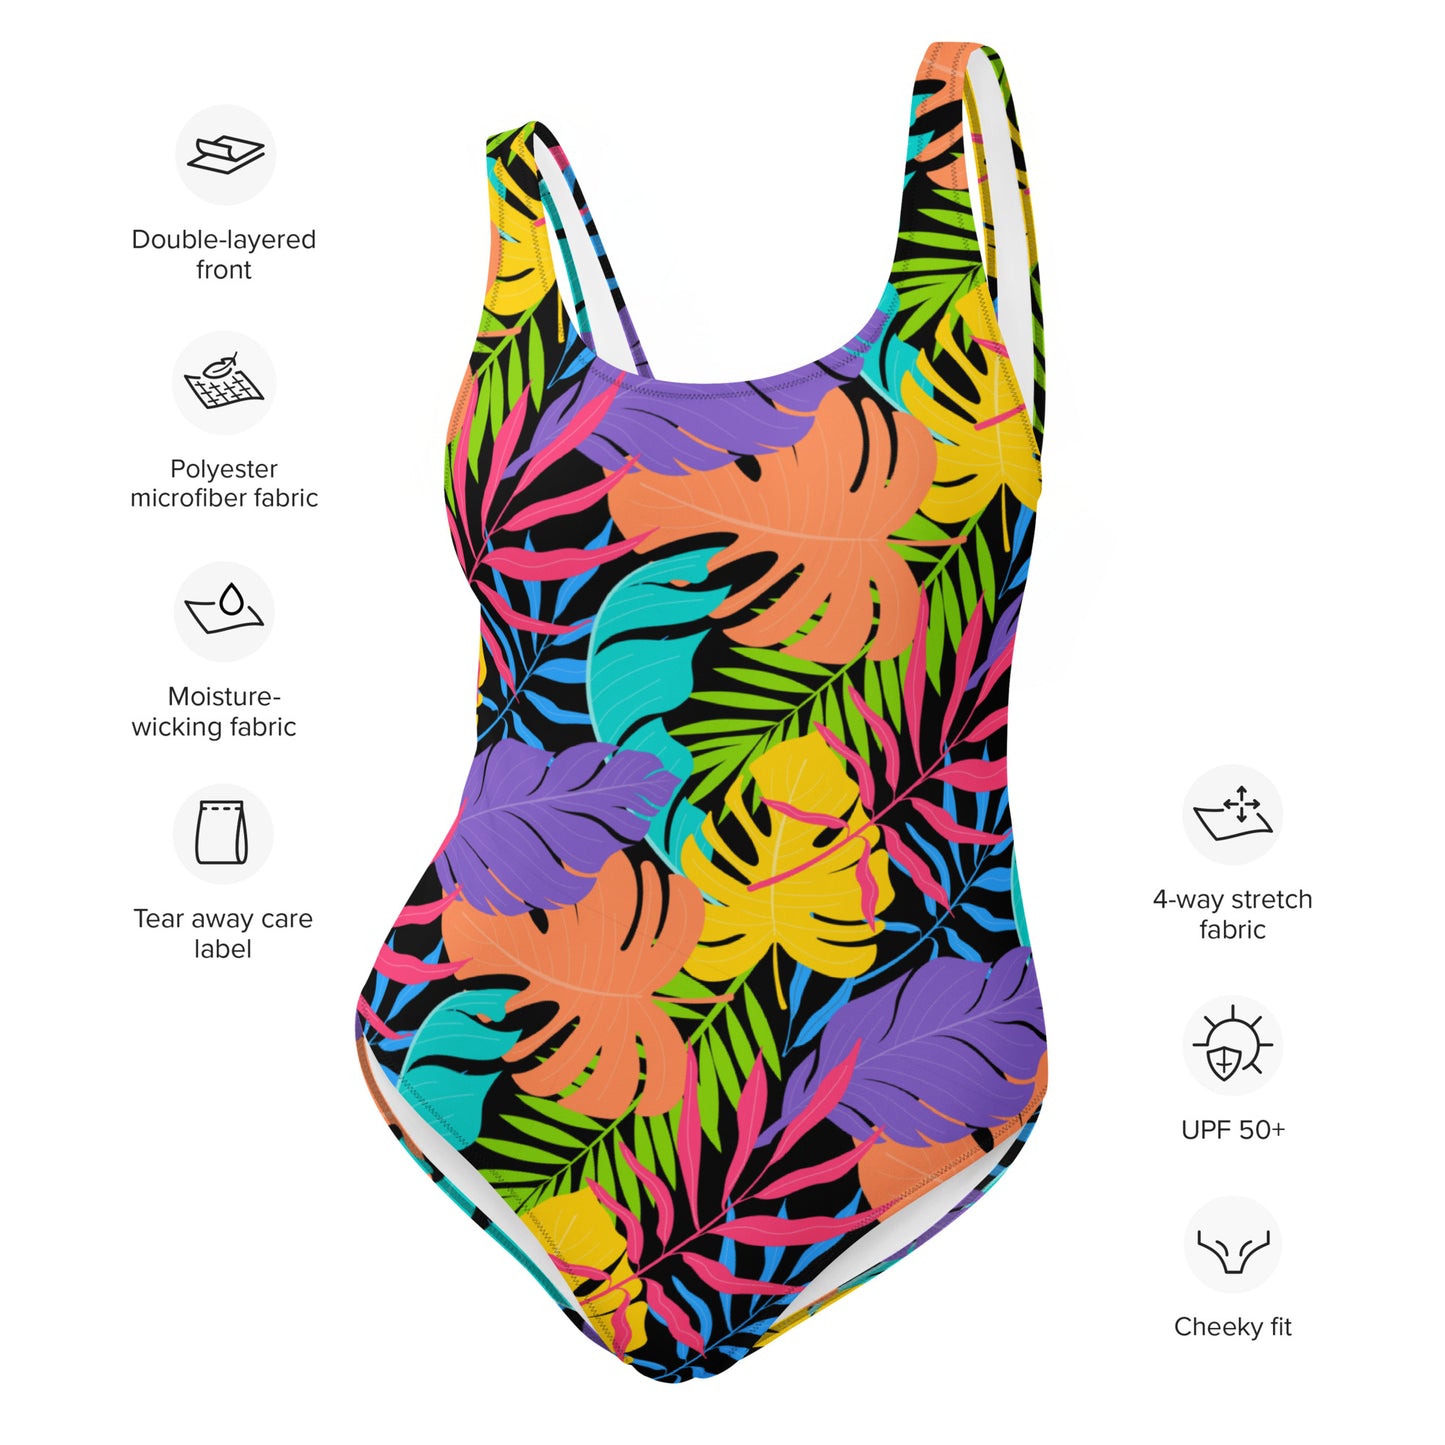 JUNGLY ONE-PIECE SWIMSUIT